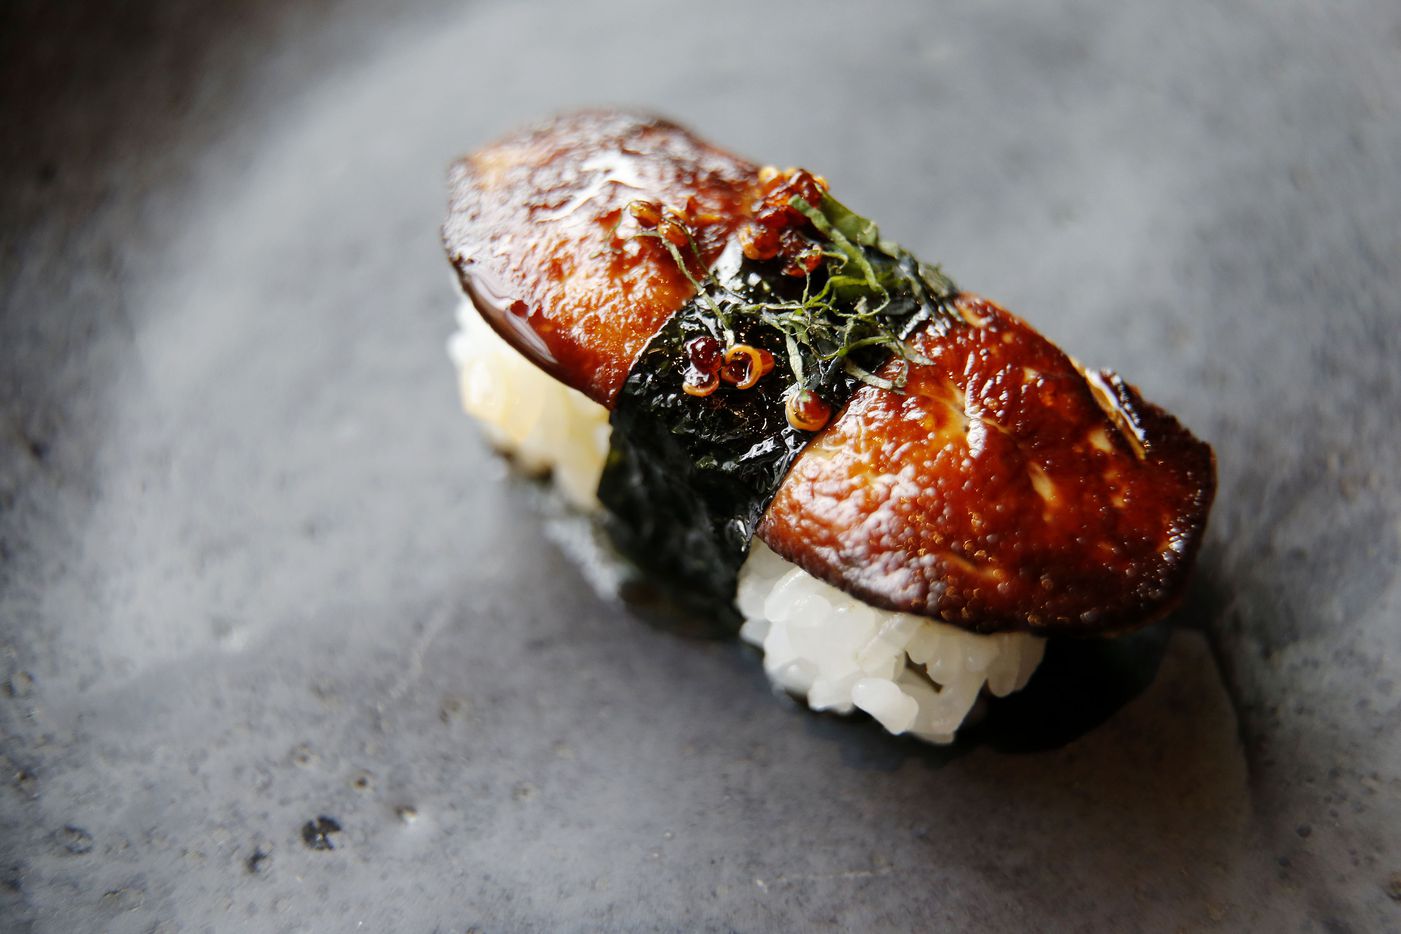 Foie gras nigiri sushi. The seared foie is brushed with fish caramel, banded with nori and...